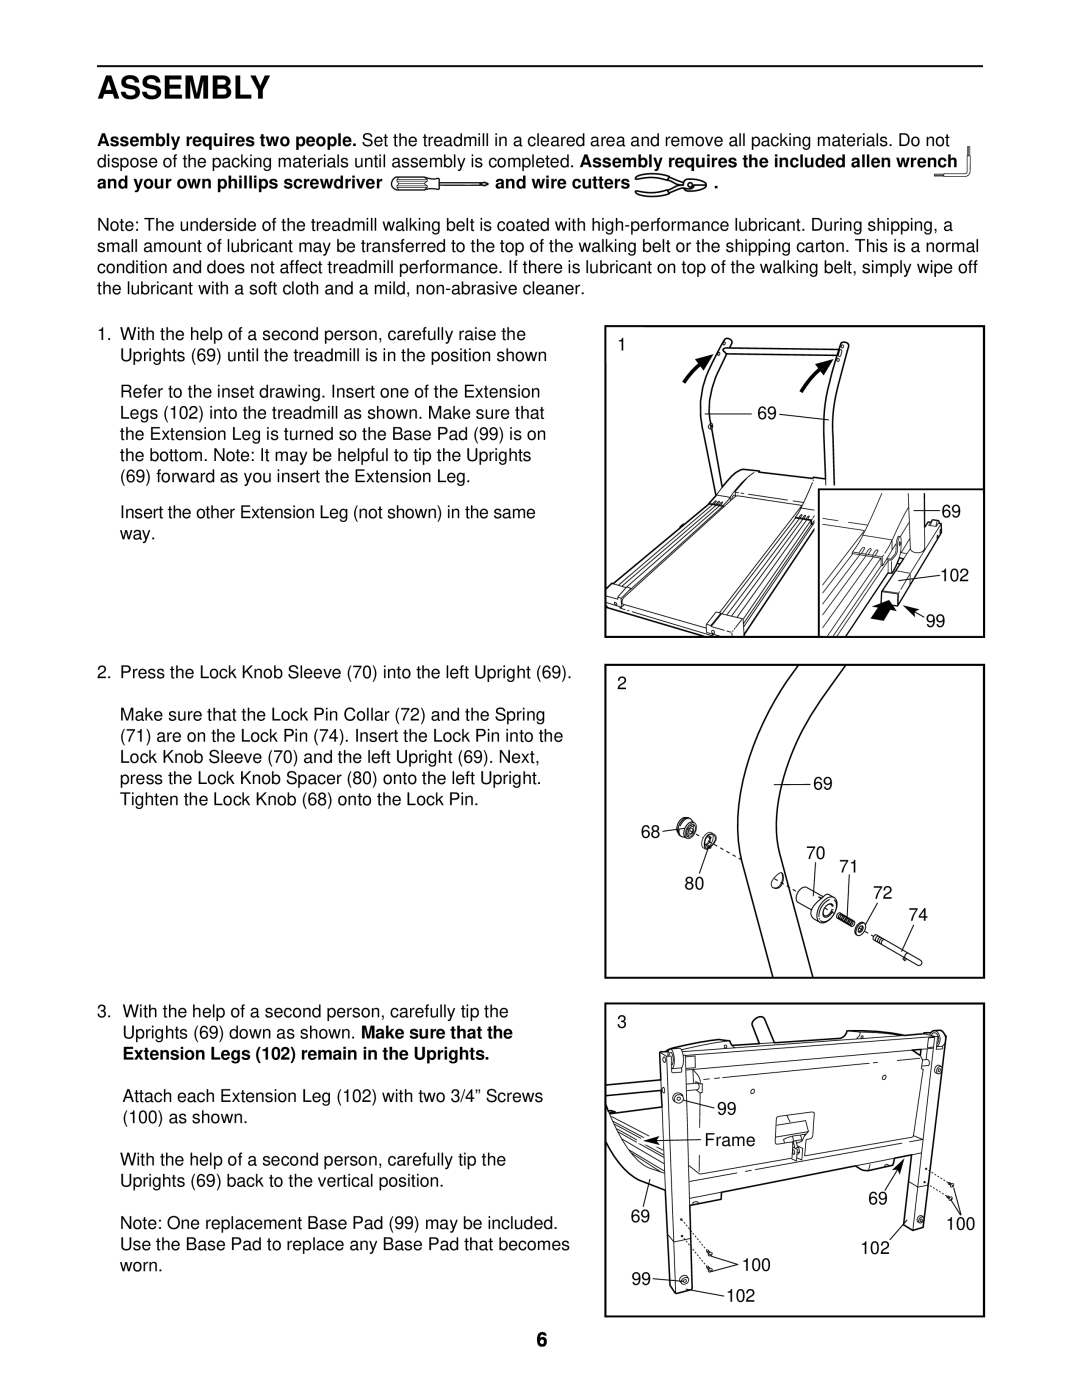 NordicTrack NTTL10510 user manual Assembly, and your own phillips screwdriver and wire cutters 